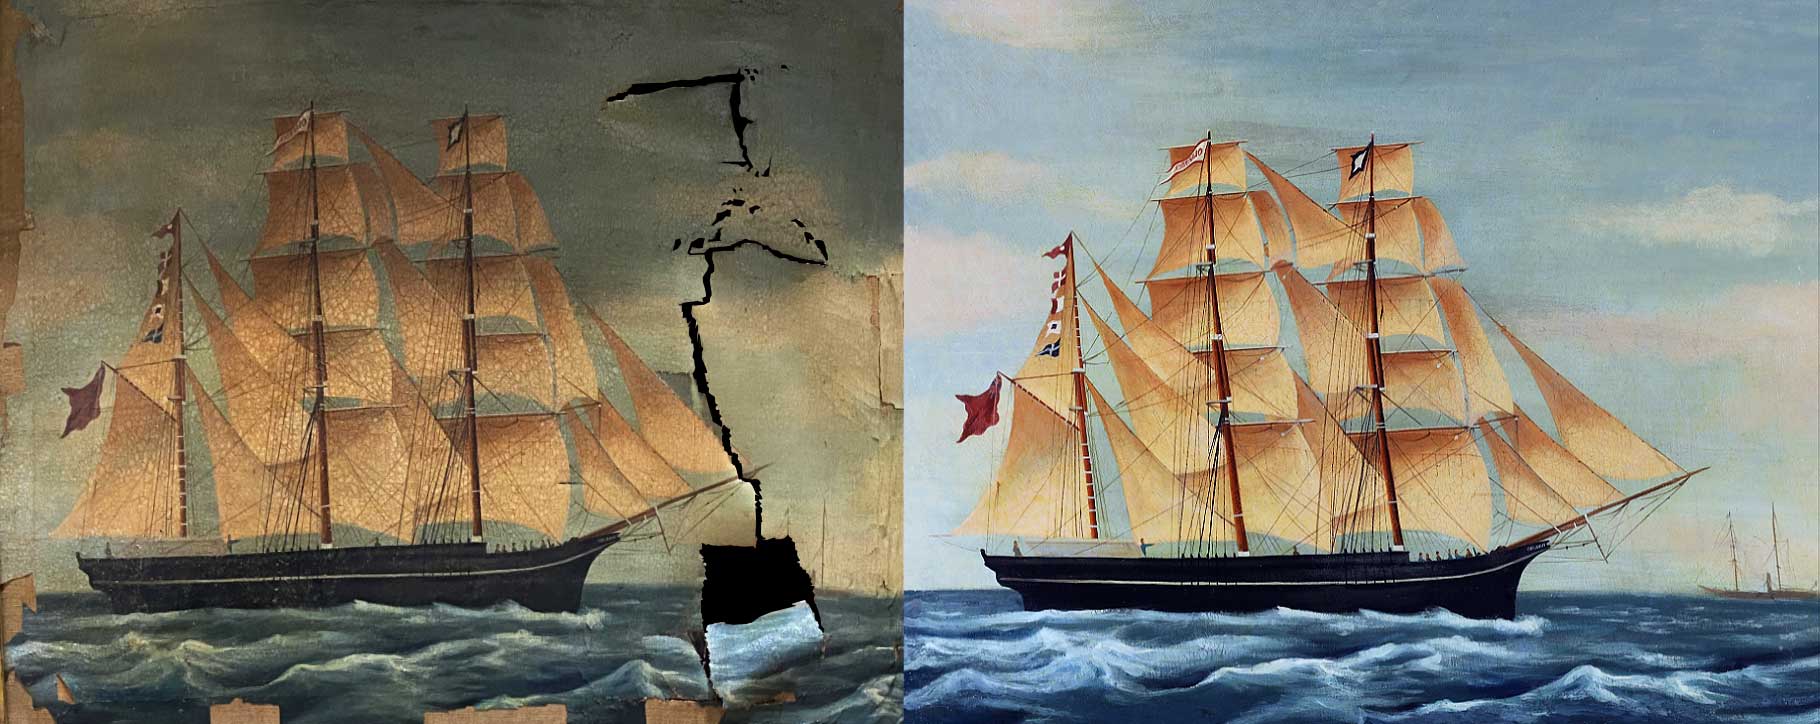 torn canvas painting of a ship - before and after restoration